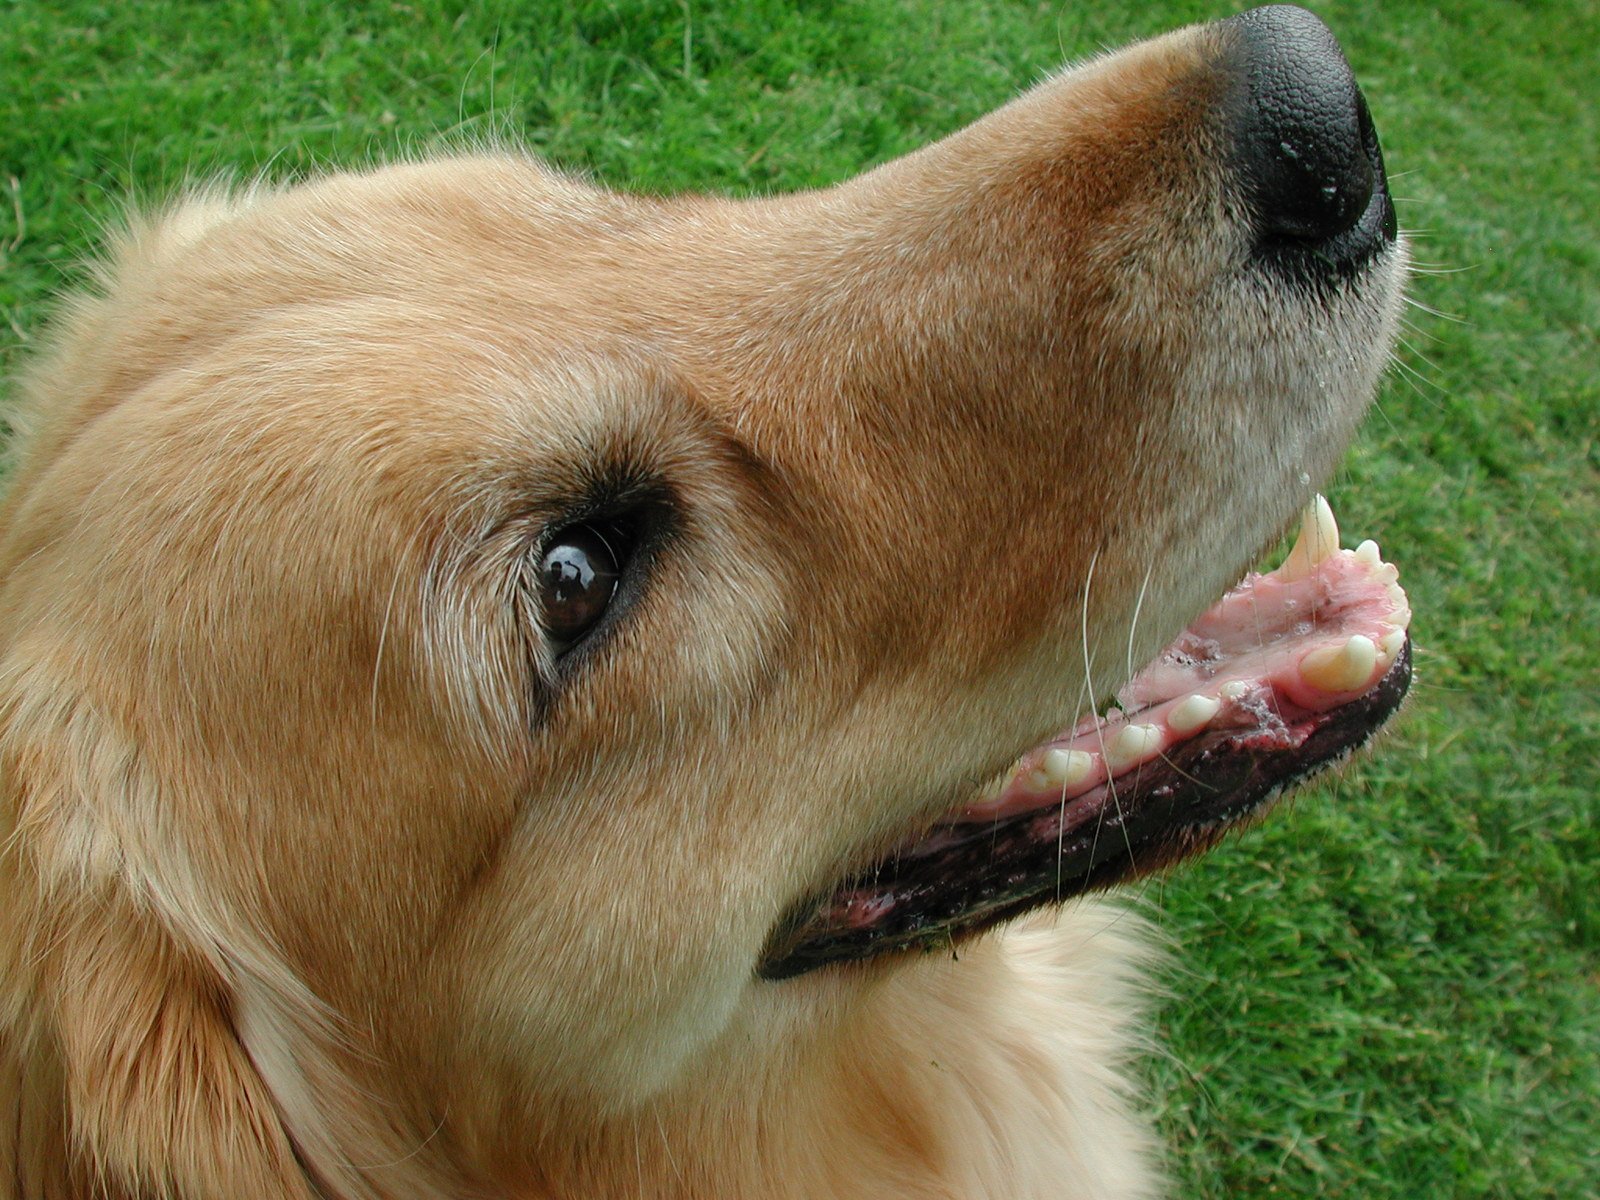 a golden retriever has his mouth open wide with a toothy grin